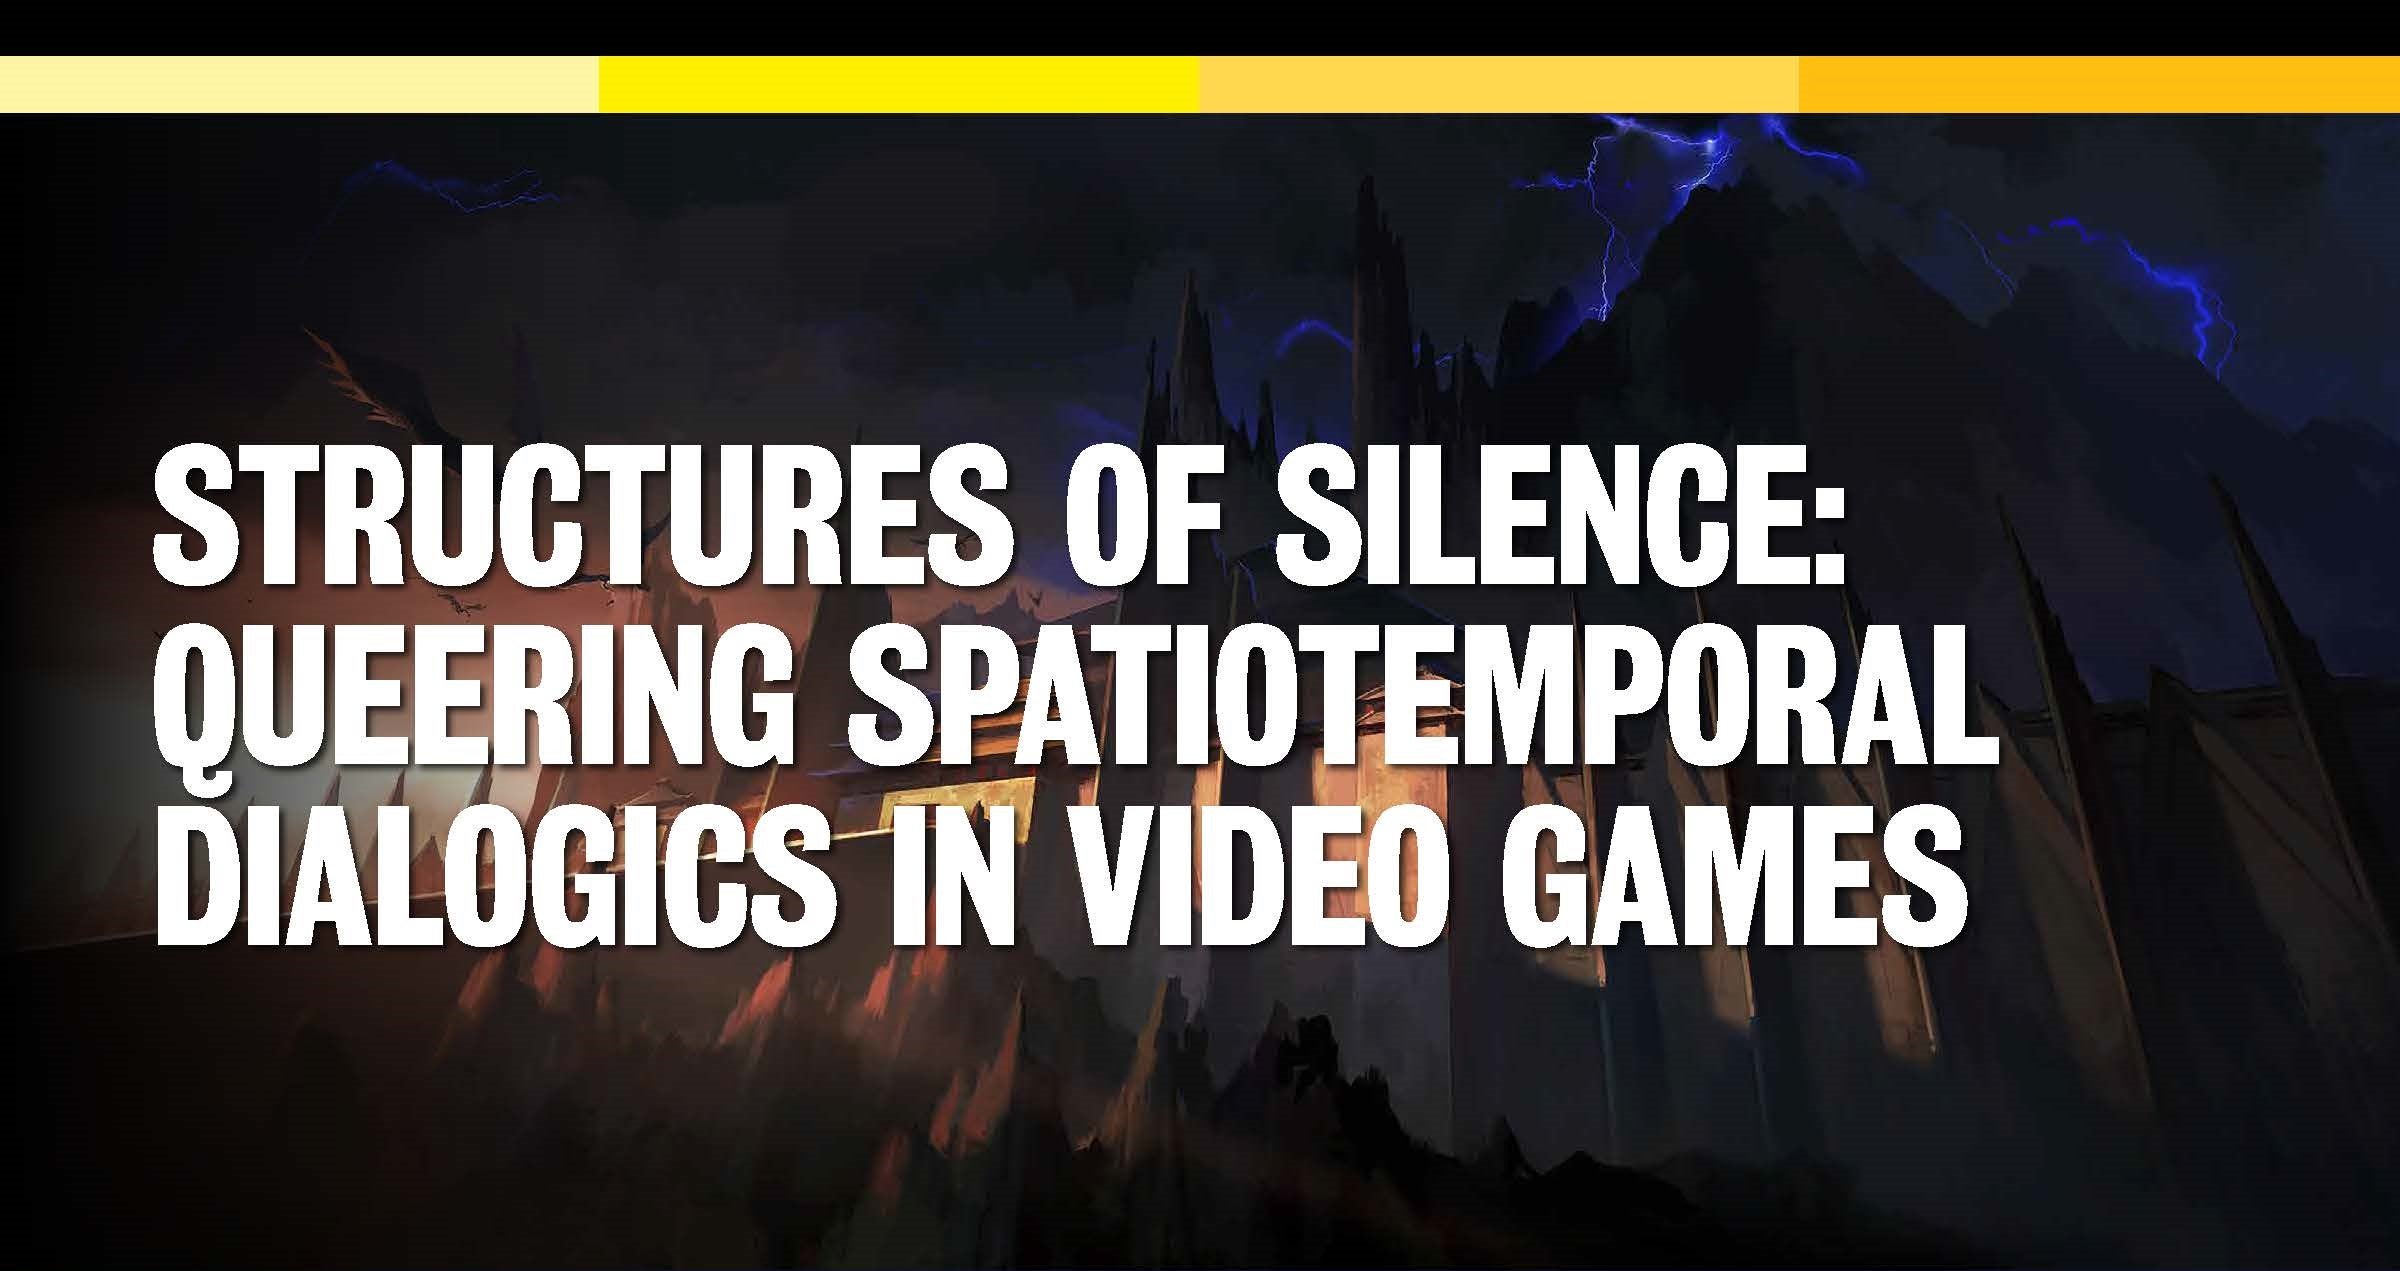 Structures of Silence: Queering Spatiotemporal Dialogics in Video Games poster title with fantasy castle background